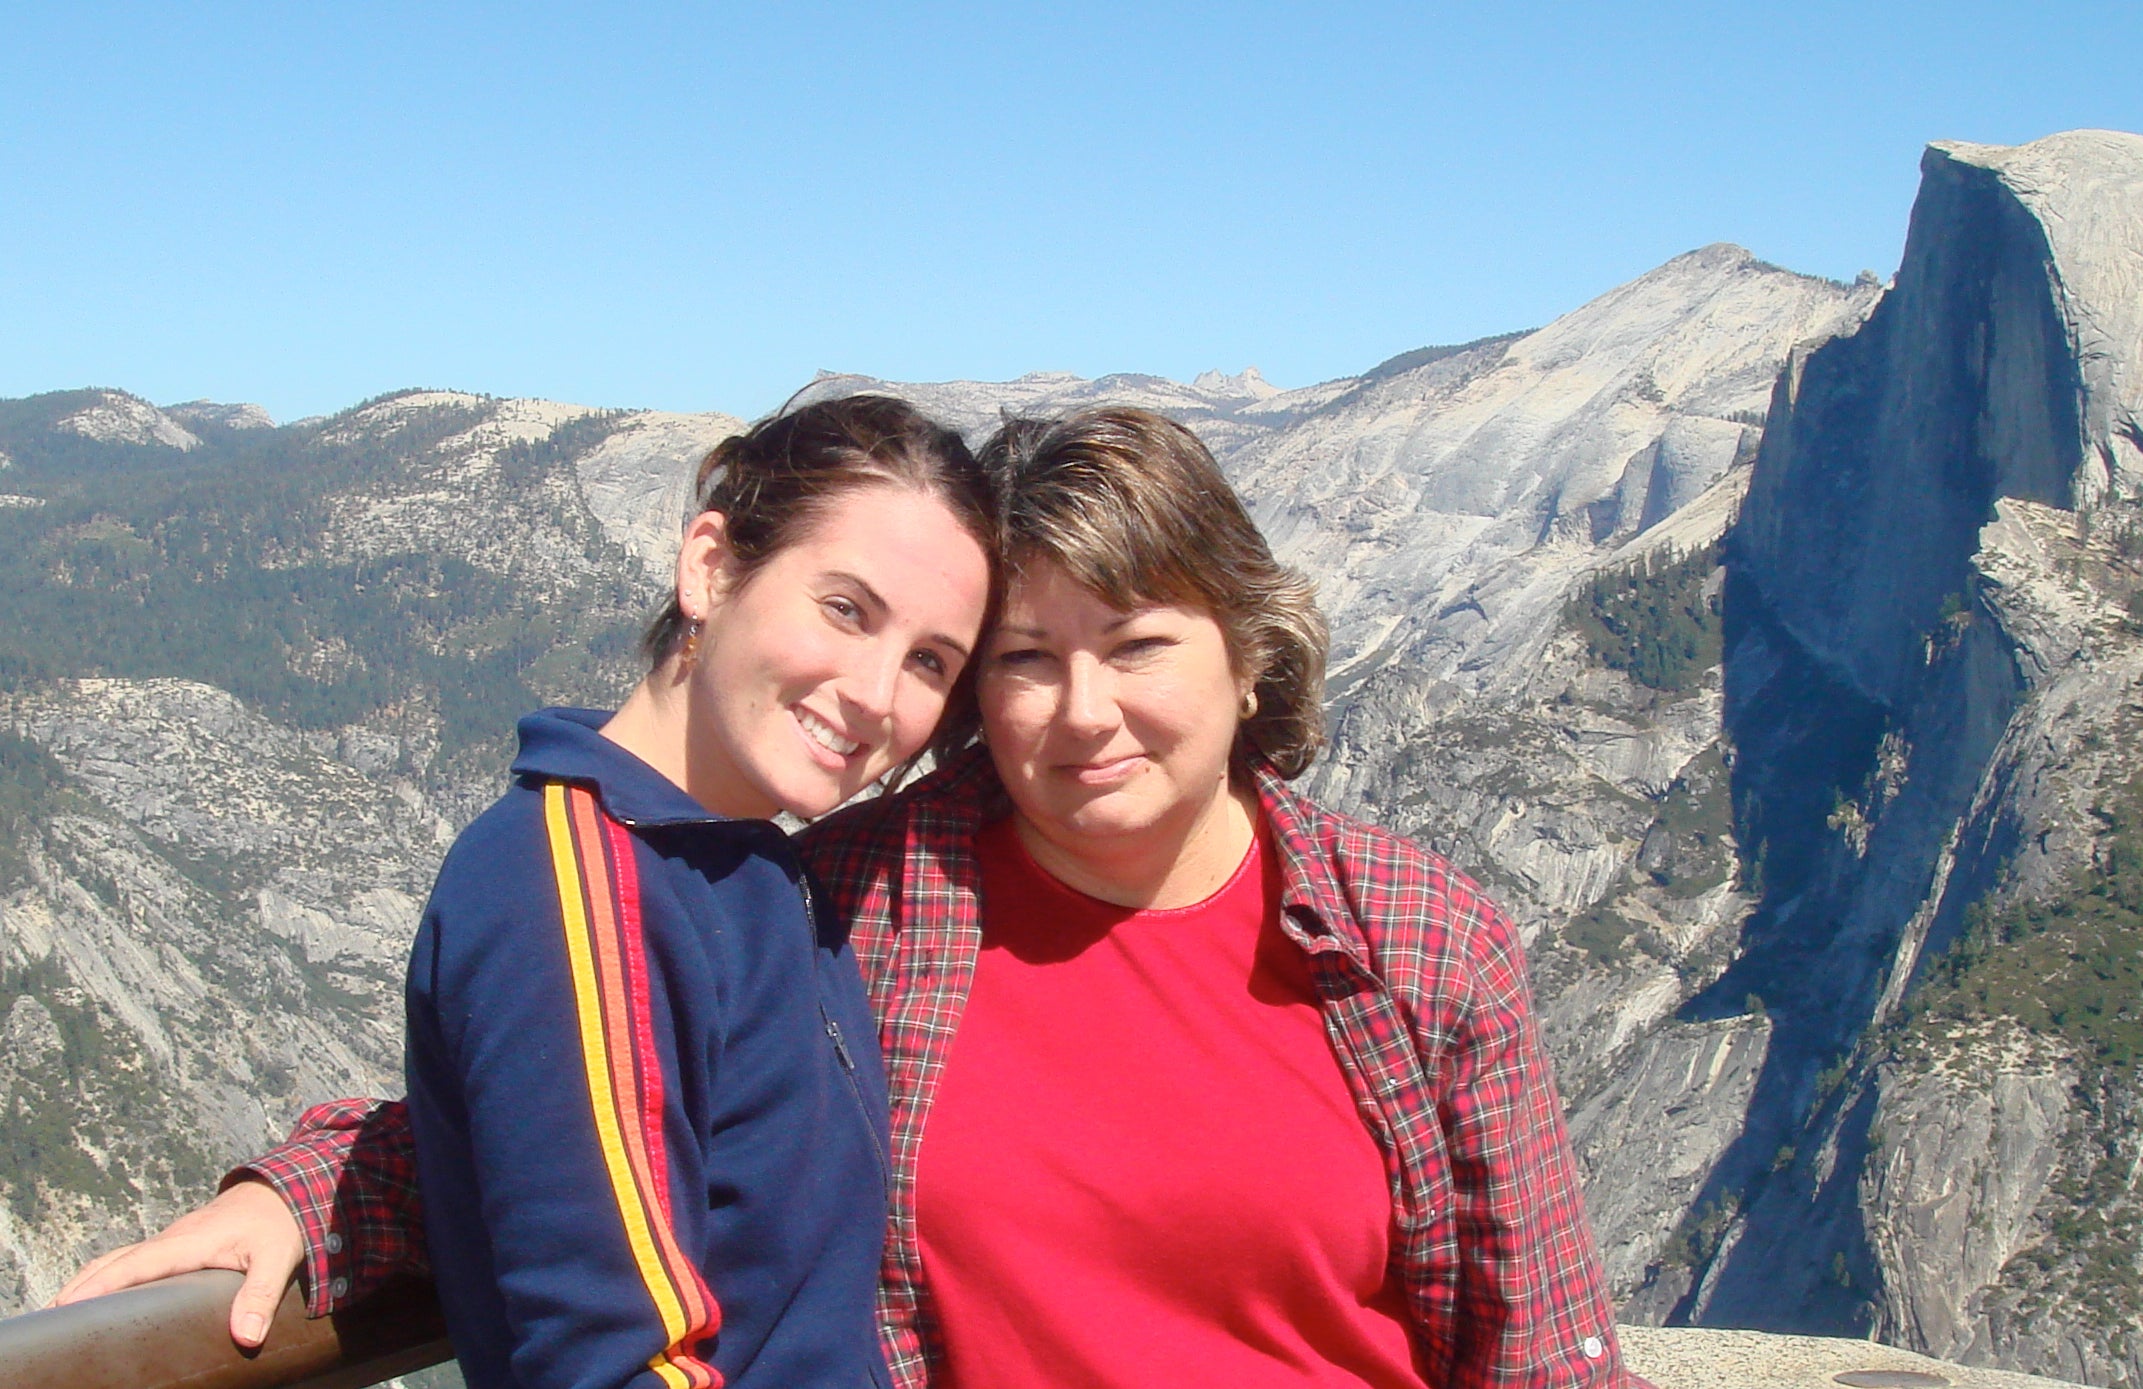 Author as a teen with her mother in the mountains